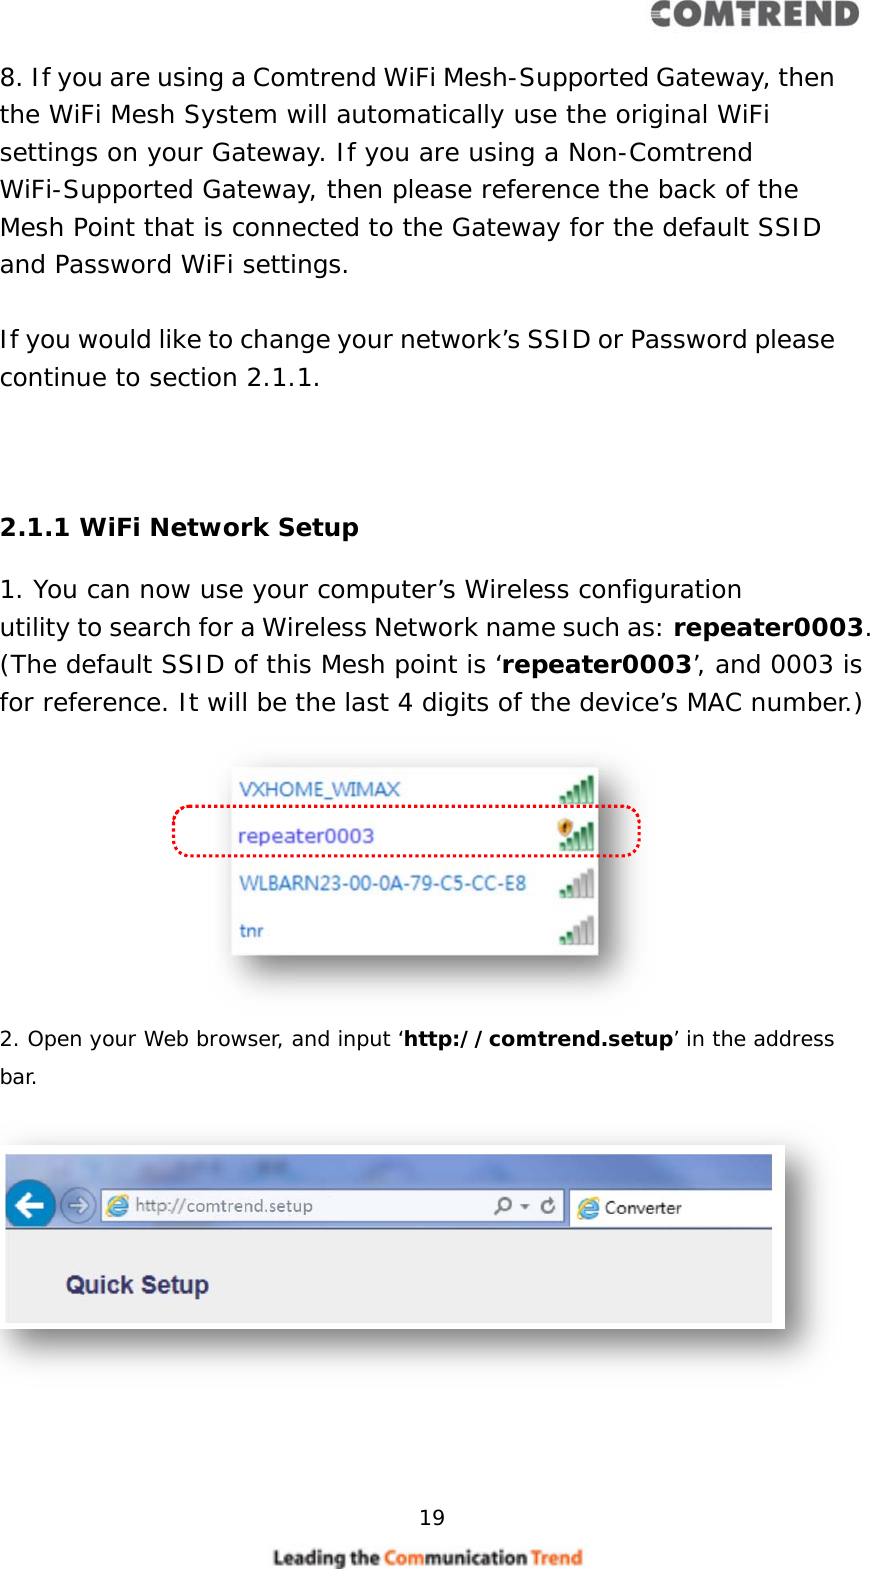     19  8. If you are using a Comtrend WiFi Mesh-Supported Gateway, then the WiFi Mesh System will automatically use the original WiFi settings on your Gateway. If you are using a Non-Comtrend WiFi-Supported Gateway, then please reference the back of the Mesh Point that is connected to the Gateway for the default SSID and Password WiFi settings.  If you would like to change your network’s SSID or Password please continue to section 2.1.1.    2.1.1 WiFi Network Setup 1. You can now use your computer’s Wireless configuration utility to search for a Wireless Network name such as: repeater0003. (The default SSID of this Mesh point is ‘repeater0003’, and 0003 is for reference. It will be the last 4 digits of the device’s MAC number.)         2. Open your Web browser, and input ‘http://comtrend.setup’ in the address bar.         